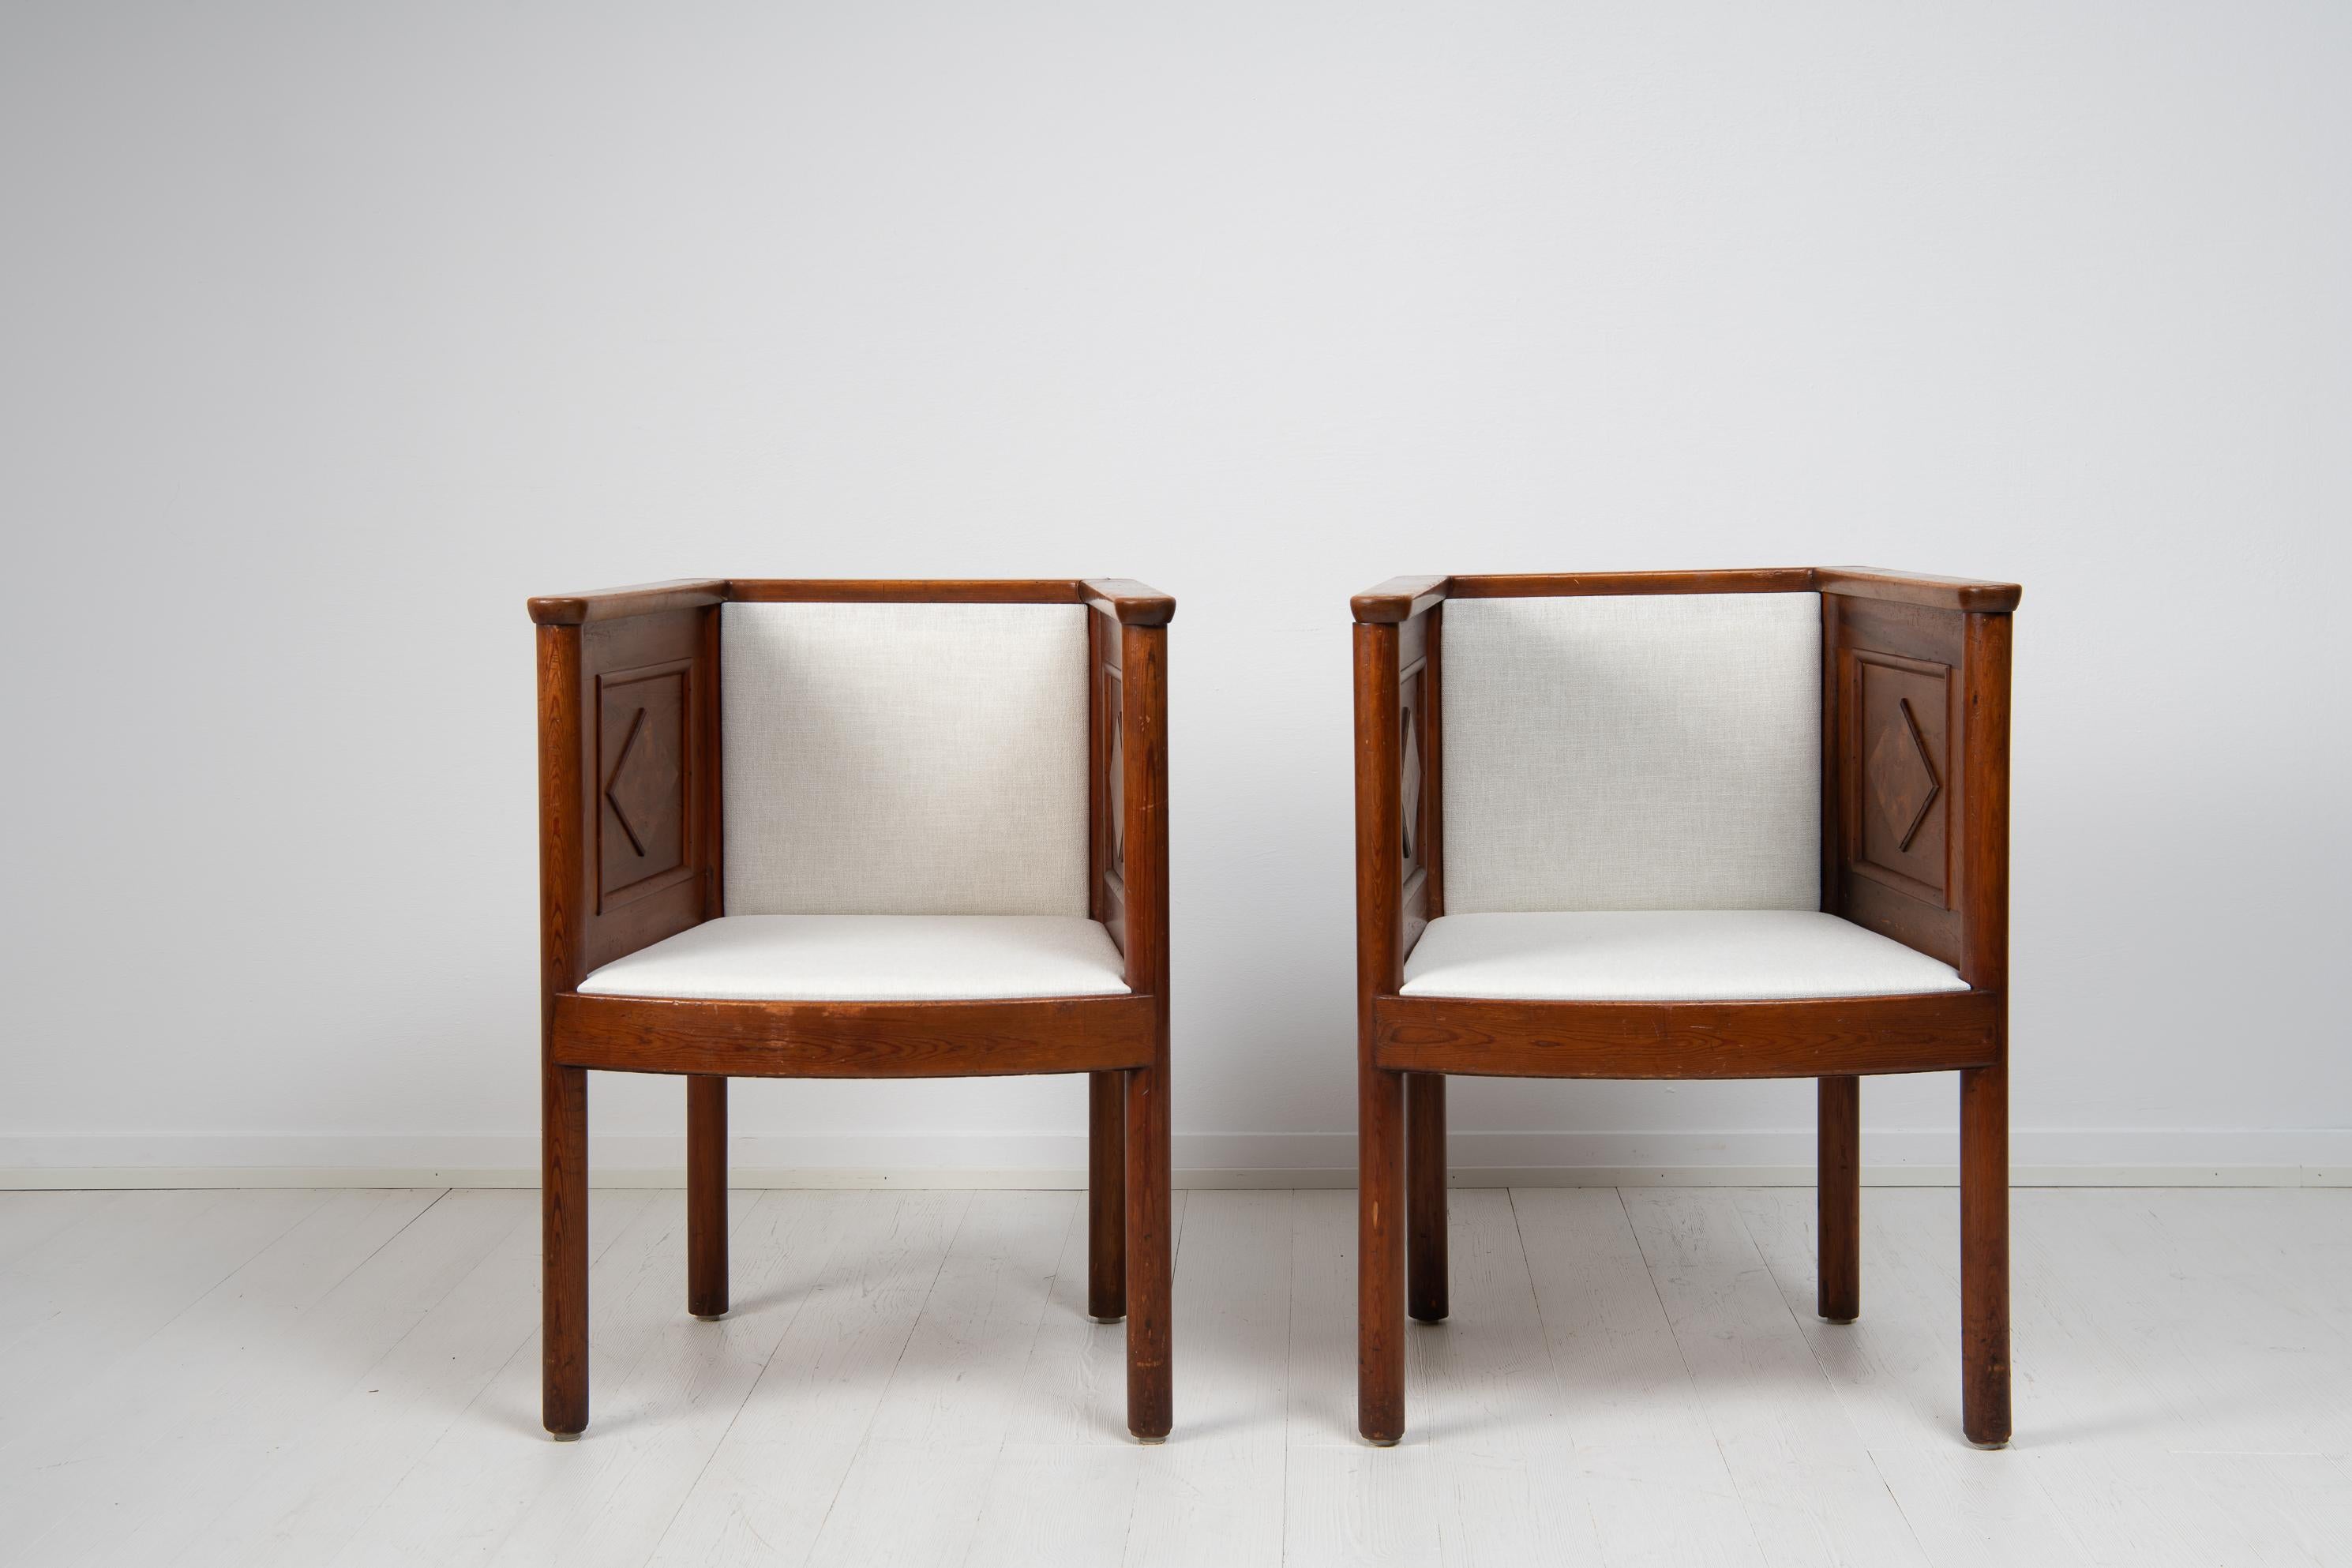 Scandinavian Modern Pair of Armchairs in the Style of Axel Einar Hjorth